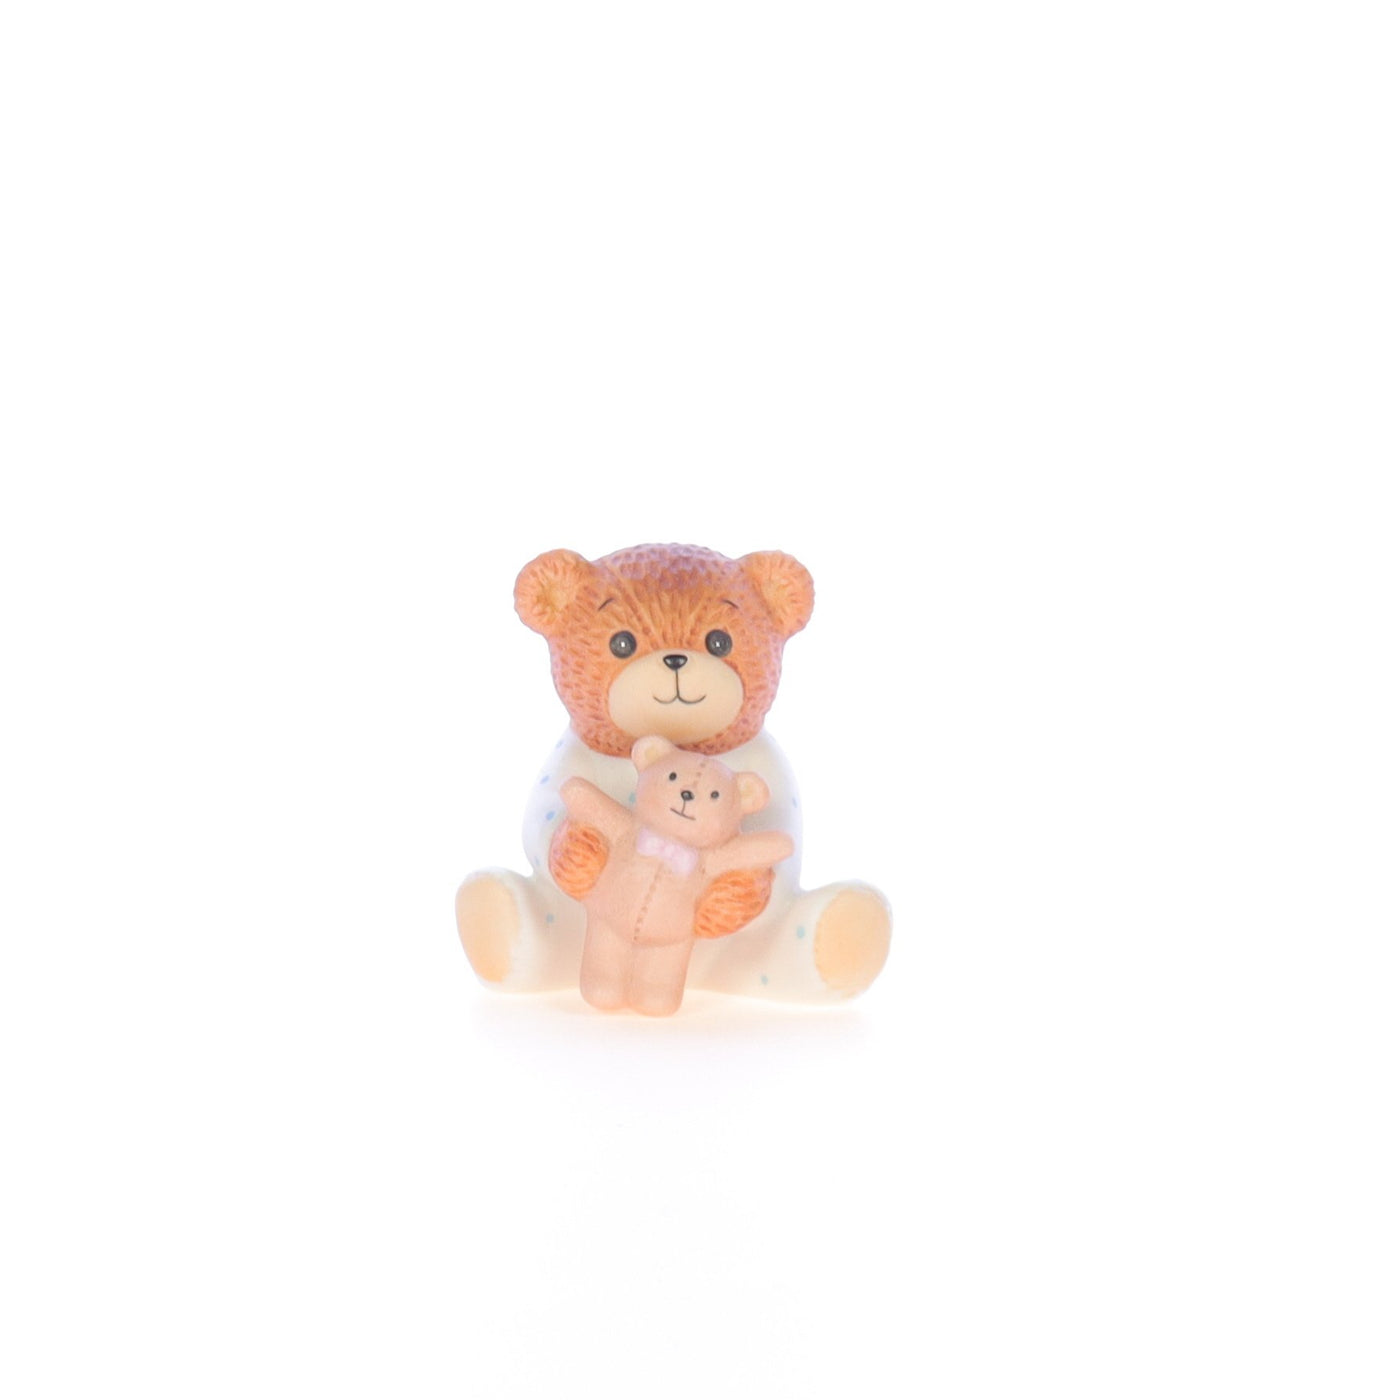 Lucy_And_Me_by_Lucy_Atwell_Porcelain_Figurine_Bear_with_Pajamas_and_Teddie_Lucy_Unknown_072_01